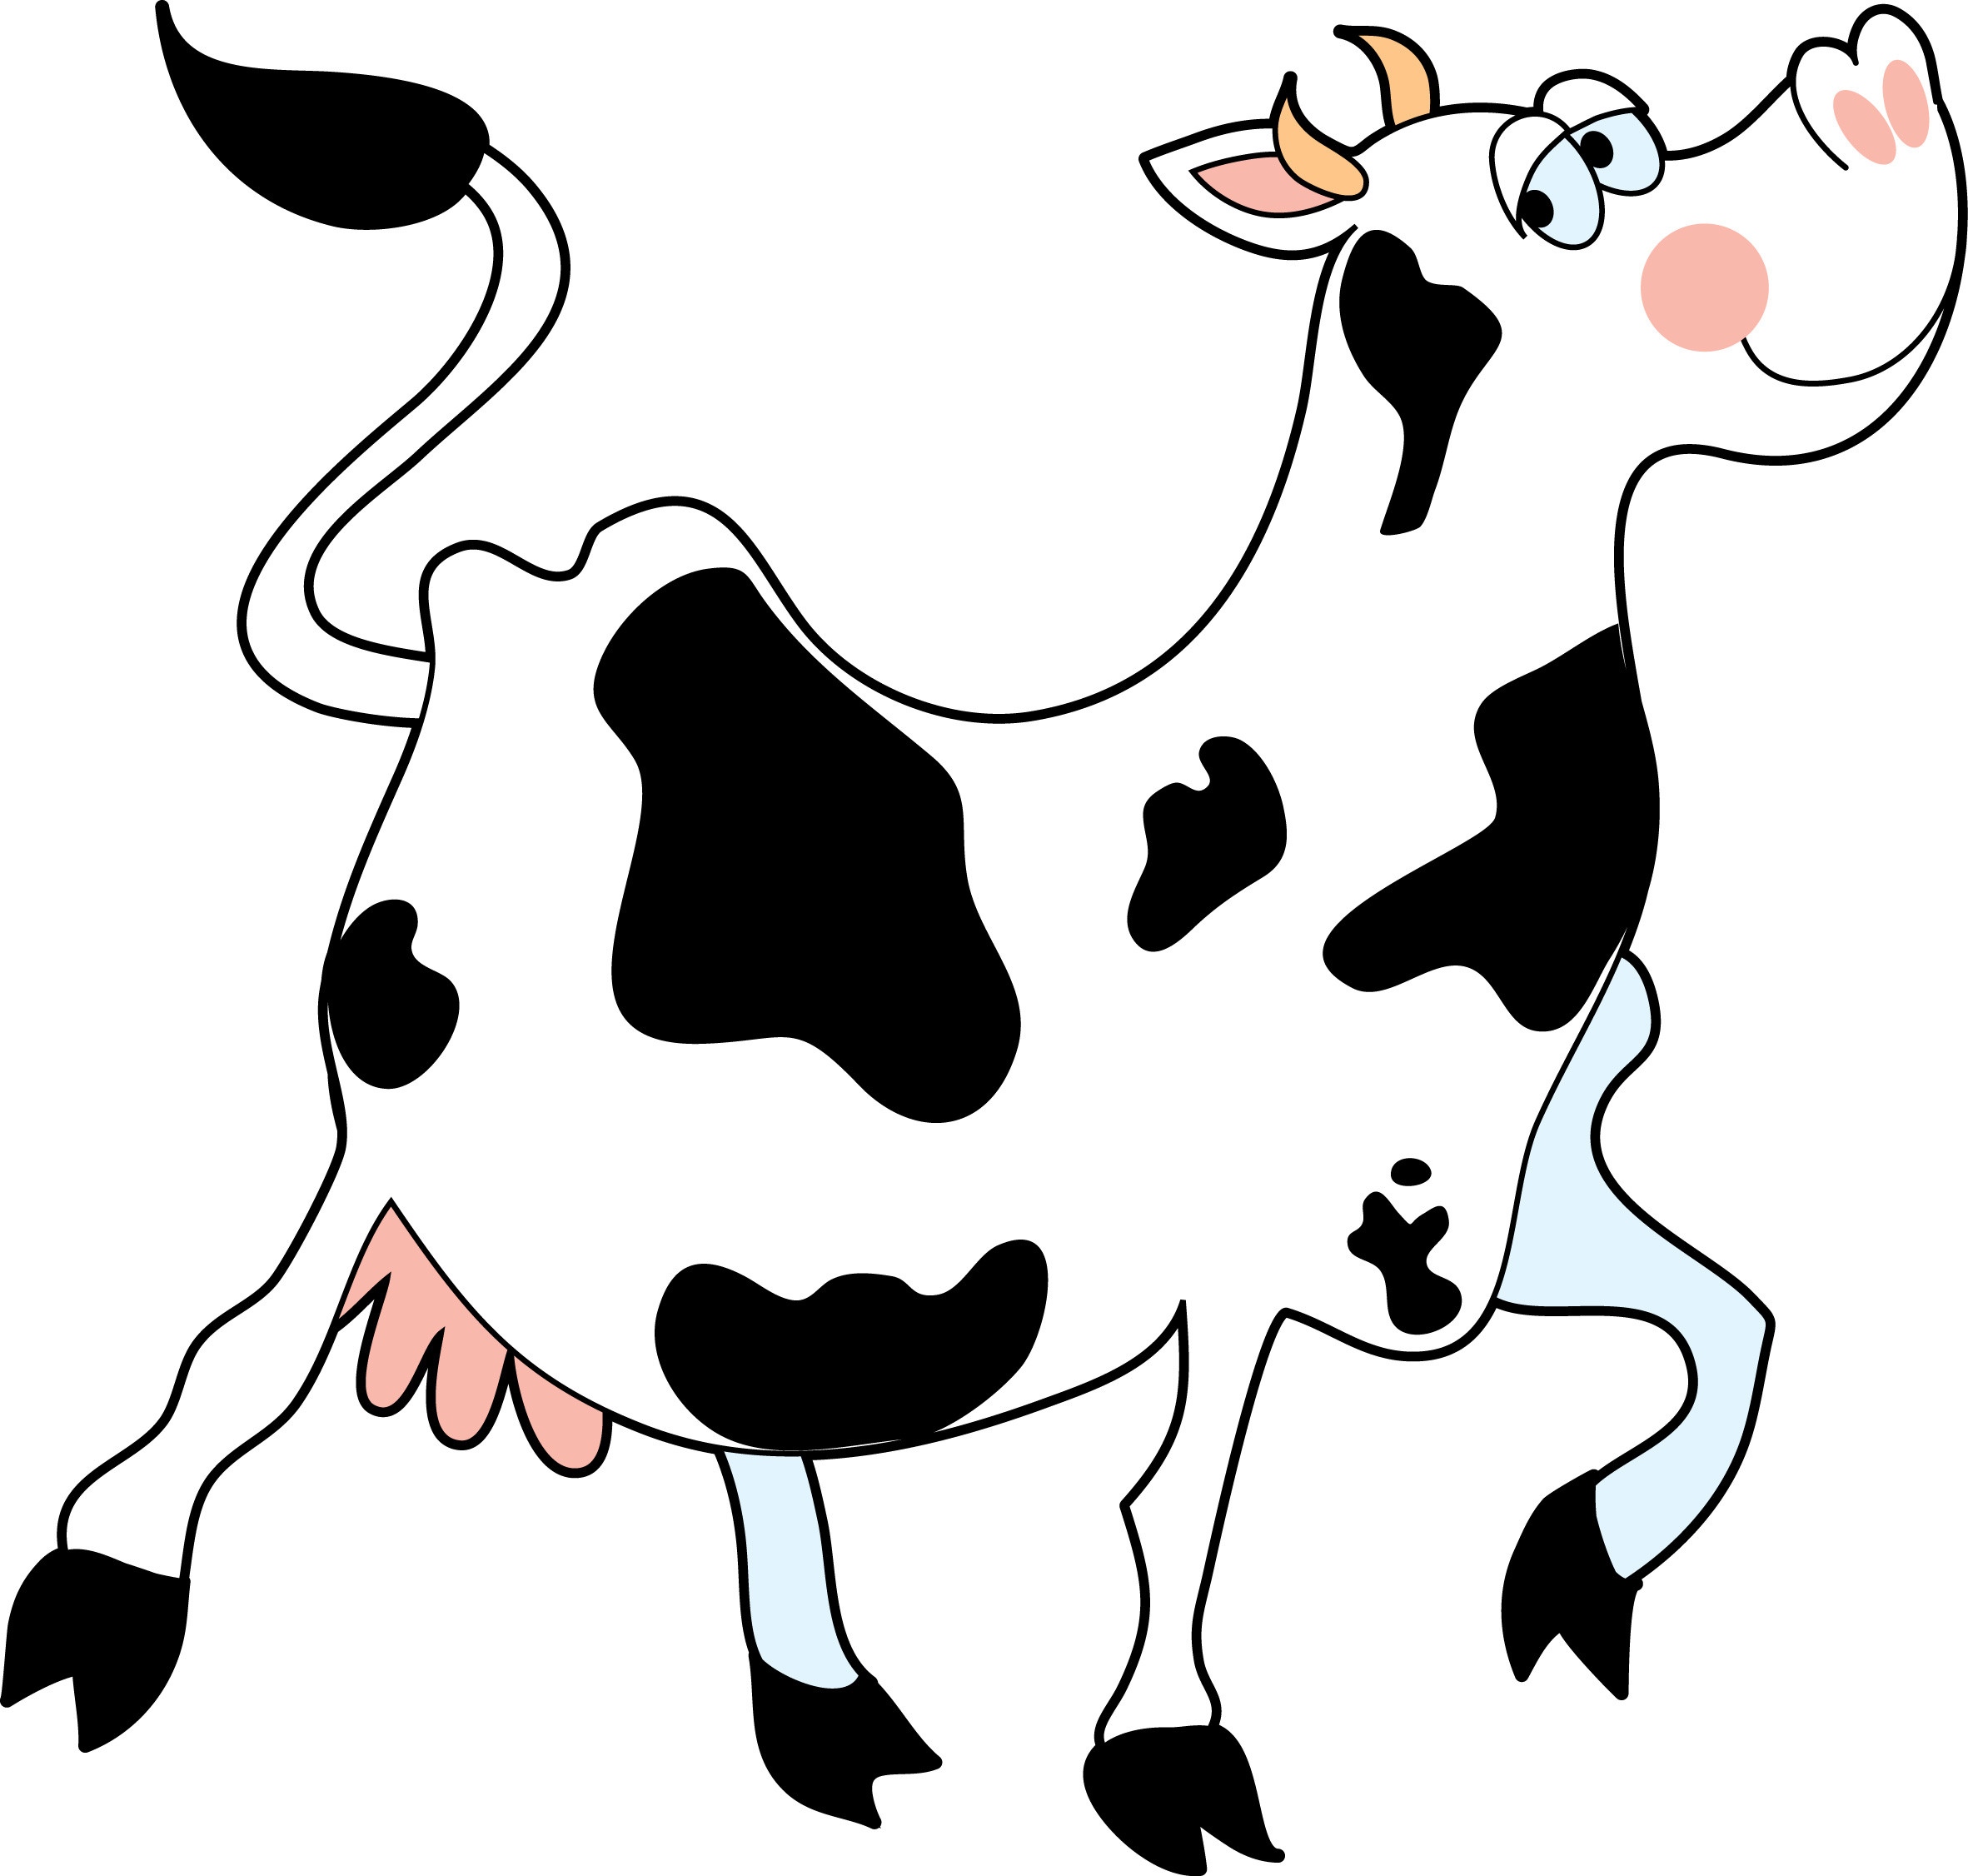 Picture Of A Cow - ClipArt Best